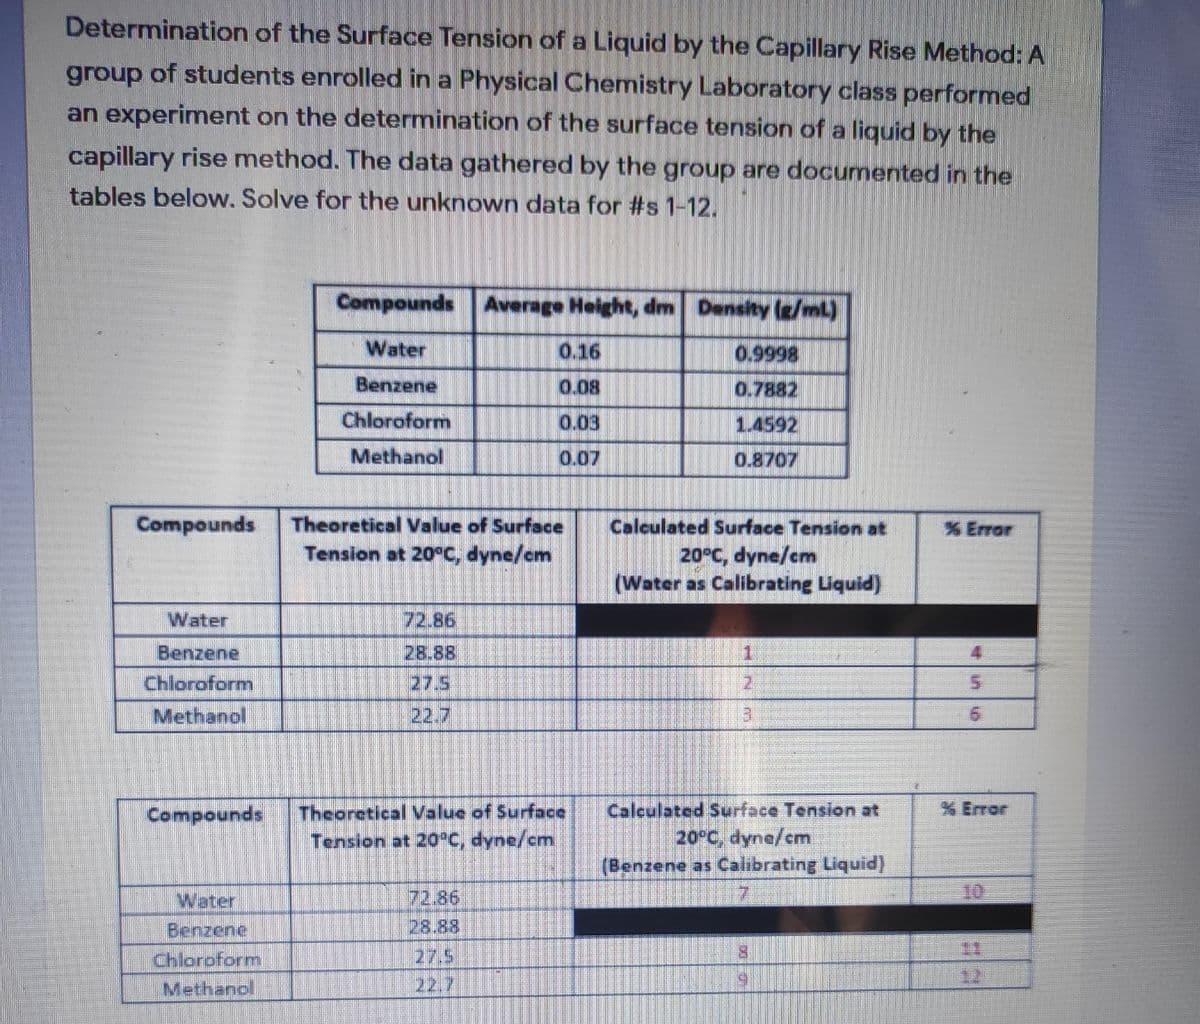 Determination of the Surface Tension of a Liquid by the Capillary Rise Method: A
group of students enrolled in a Physical Chemistry Laboratory class performed
an experiment on the determination of the surface tension of a liquid by the
capillary rise method. The data gathered by the group are documented in the
tables below. Solve for the unknown data for #s 1-12.
Compounds Average Height, dm Density (e/ml)
Water
0.16
0.9998
Benzene
0.08
0.7882
Chloroform
0.03
1.4592
Methanol
0.07
0.8707
Compounds
Theoretical Value of Surface
Calculated Surface Tension at
20°C, dyne/cm
(Water as Calibrating Liquid)
% Error
Tension at 20°C, dyne/cm
Water
72.86
Benzene
28.88
Chloroform
27.5
Methanol
22.7
Calculated Surface Tension at
20°C, dyne/cm
(Benzene as Calibrating Liquid)
X Error
Theoretical Value of Surface
Tension at 20°C, dyne/cmn
Compounds
Water
72.86
10
28.88
27.5
22.7
Benzene
11
Chloroform
12
Methanol
